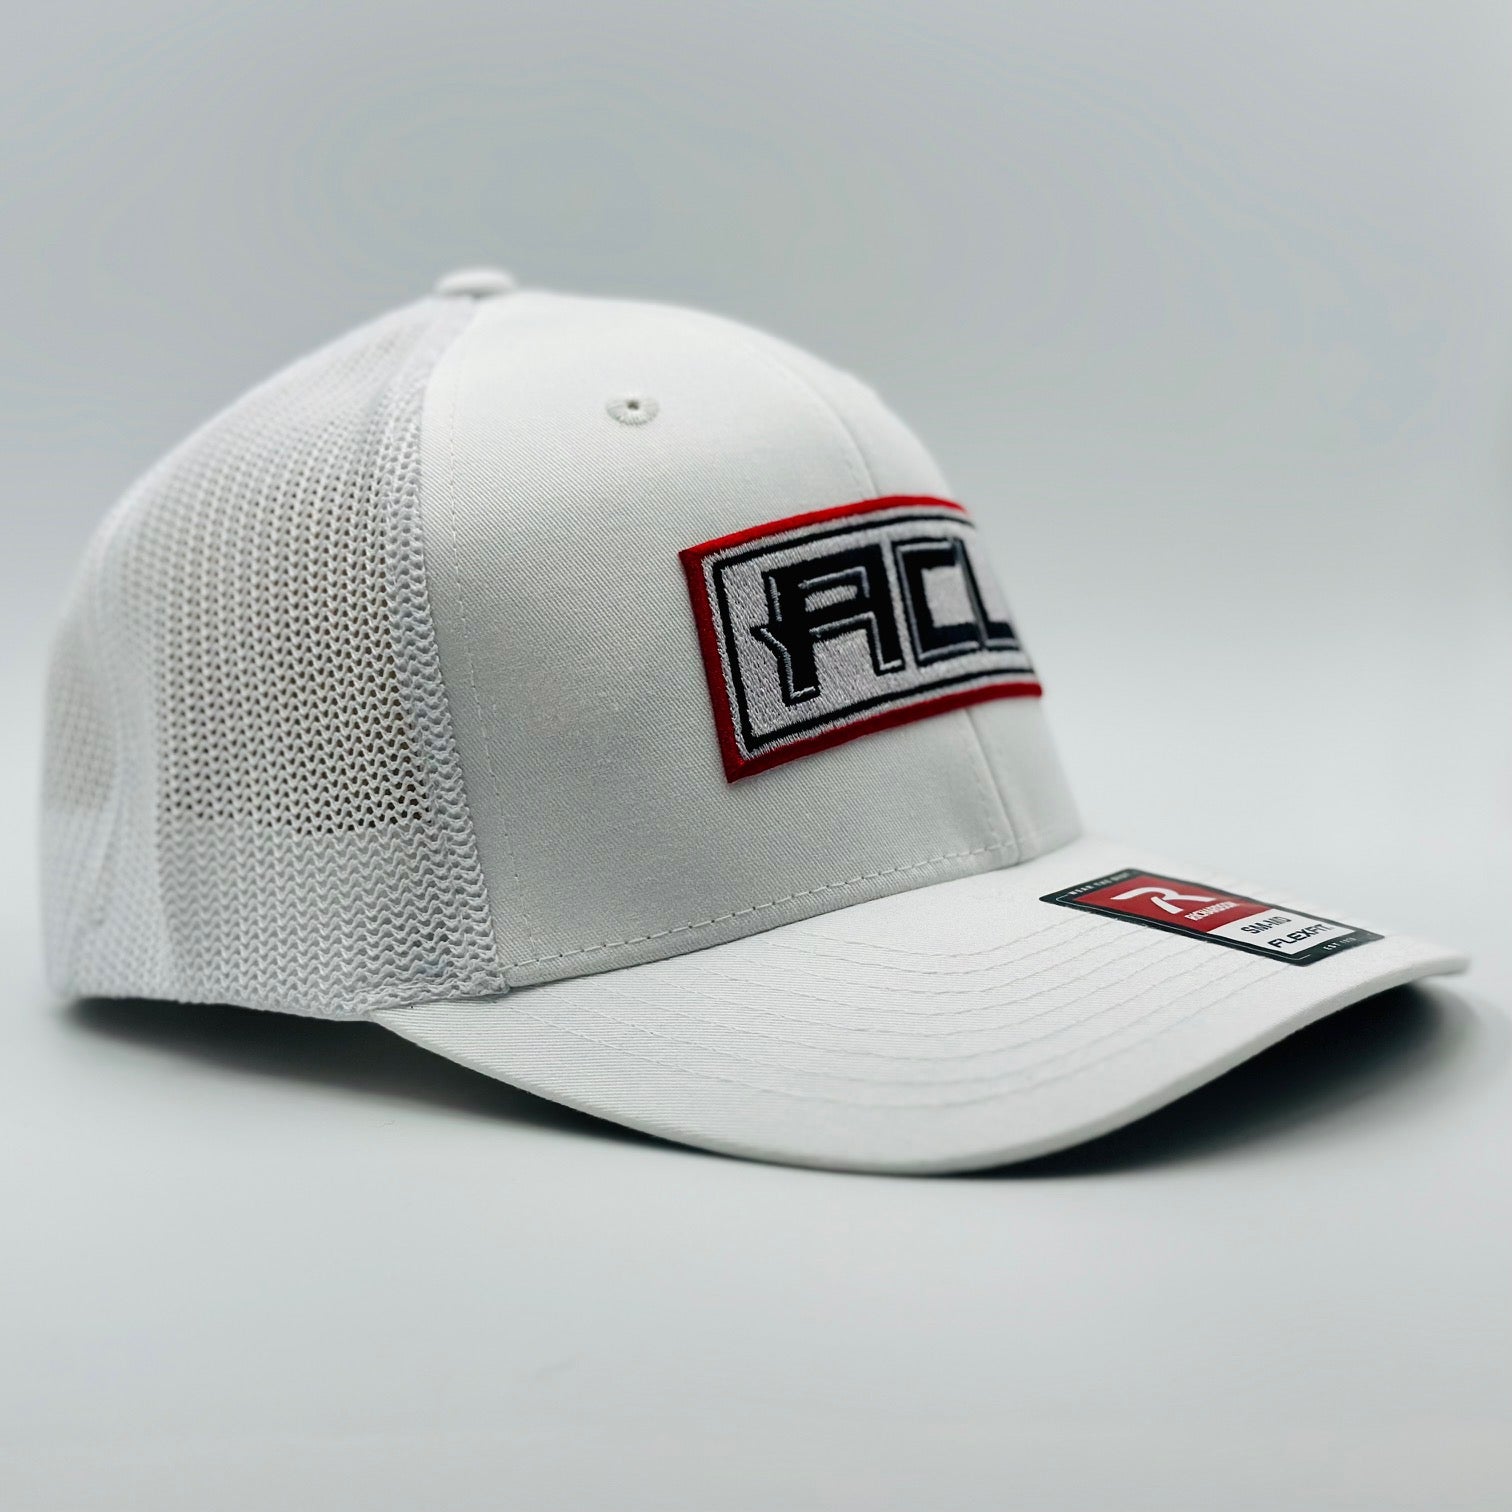 White Flex Hat With Stitched Patch